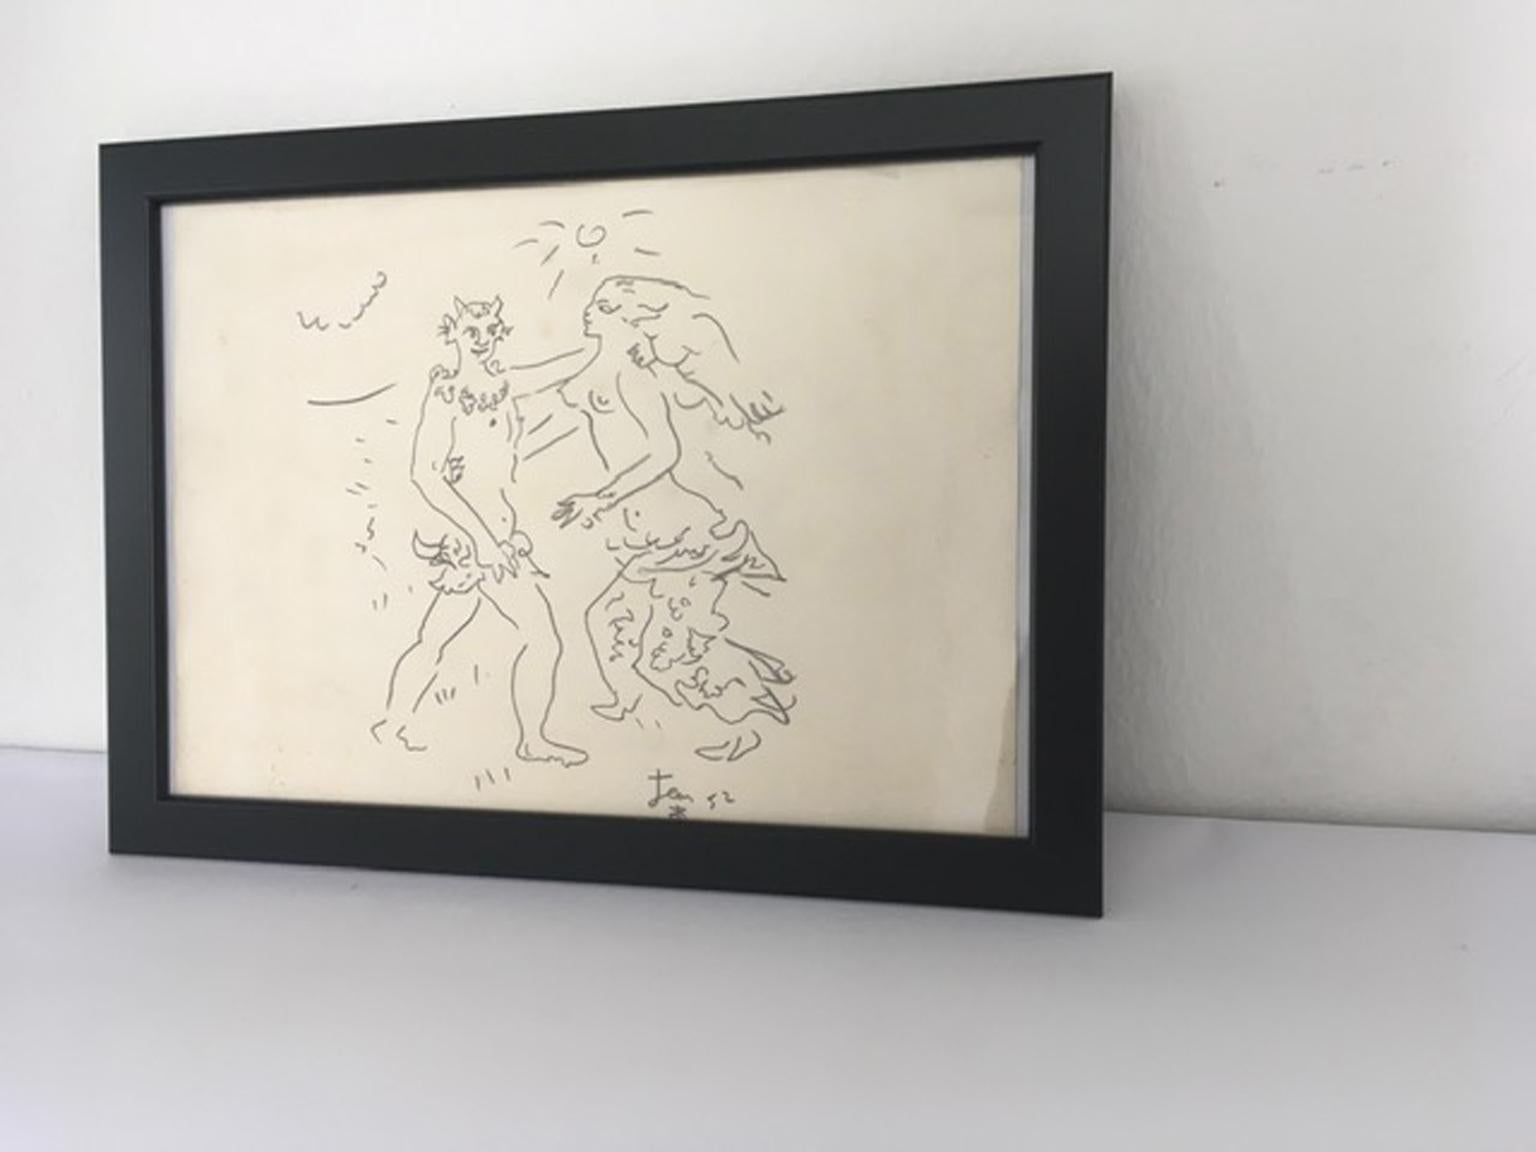 1980 Fauno e Ninfa Faun and Nymph Pencil on Paper Figurative Drawing - Academic Art by Jean 52 